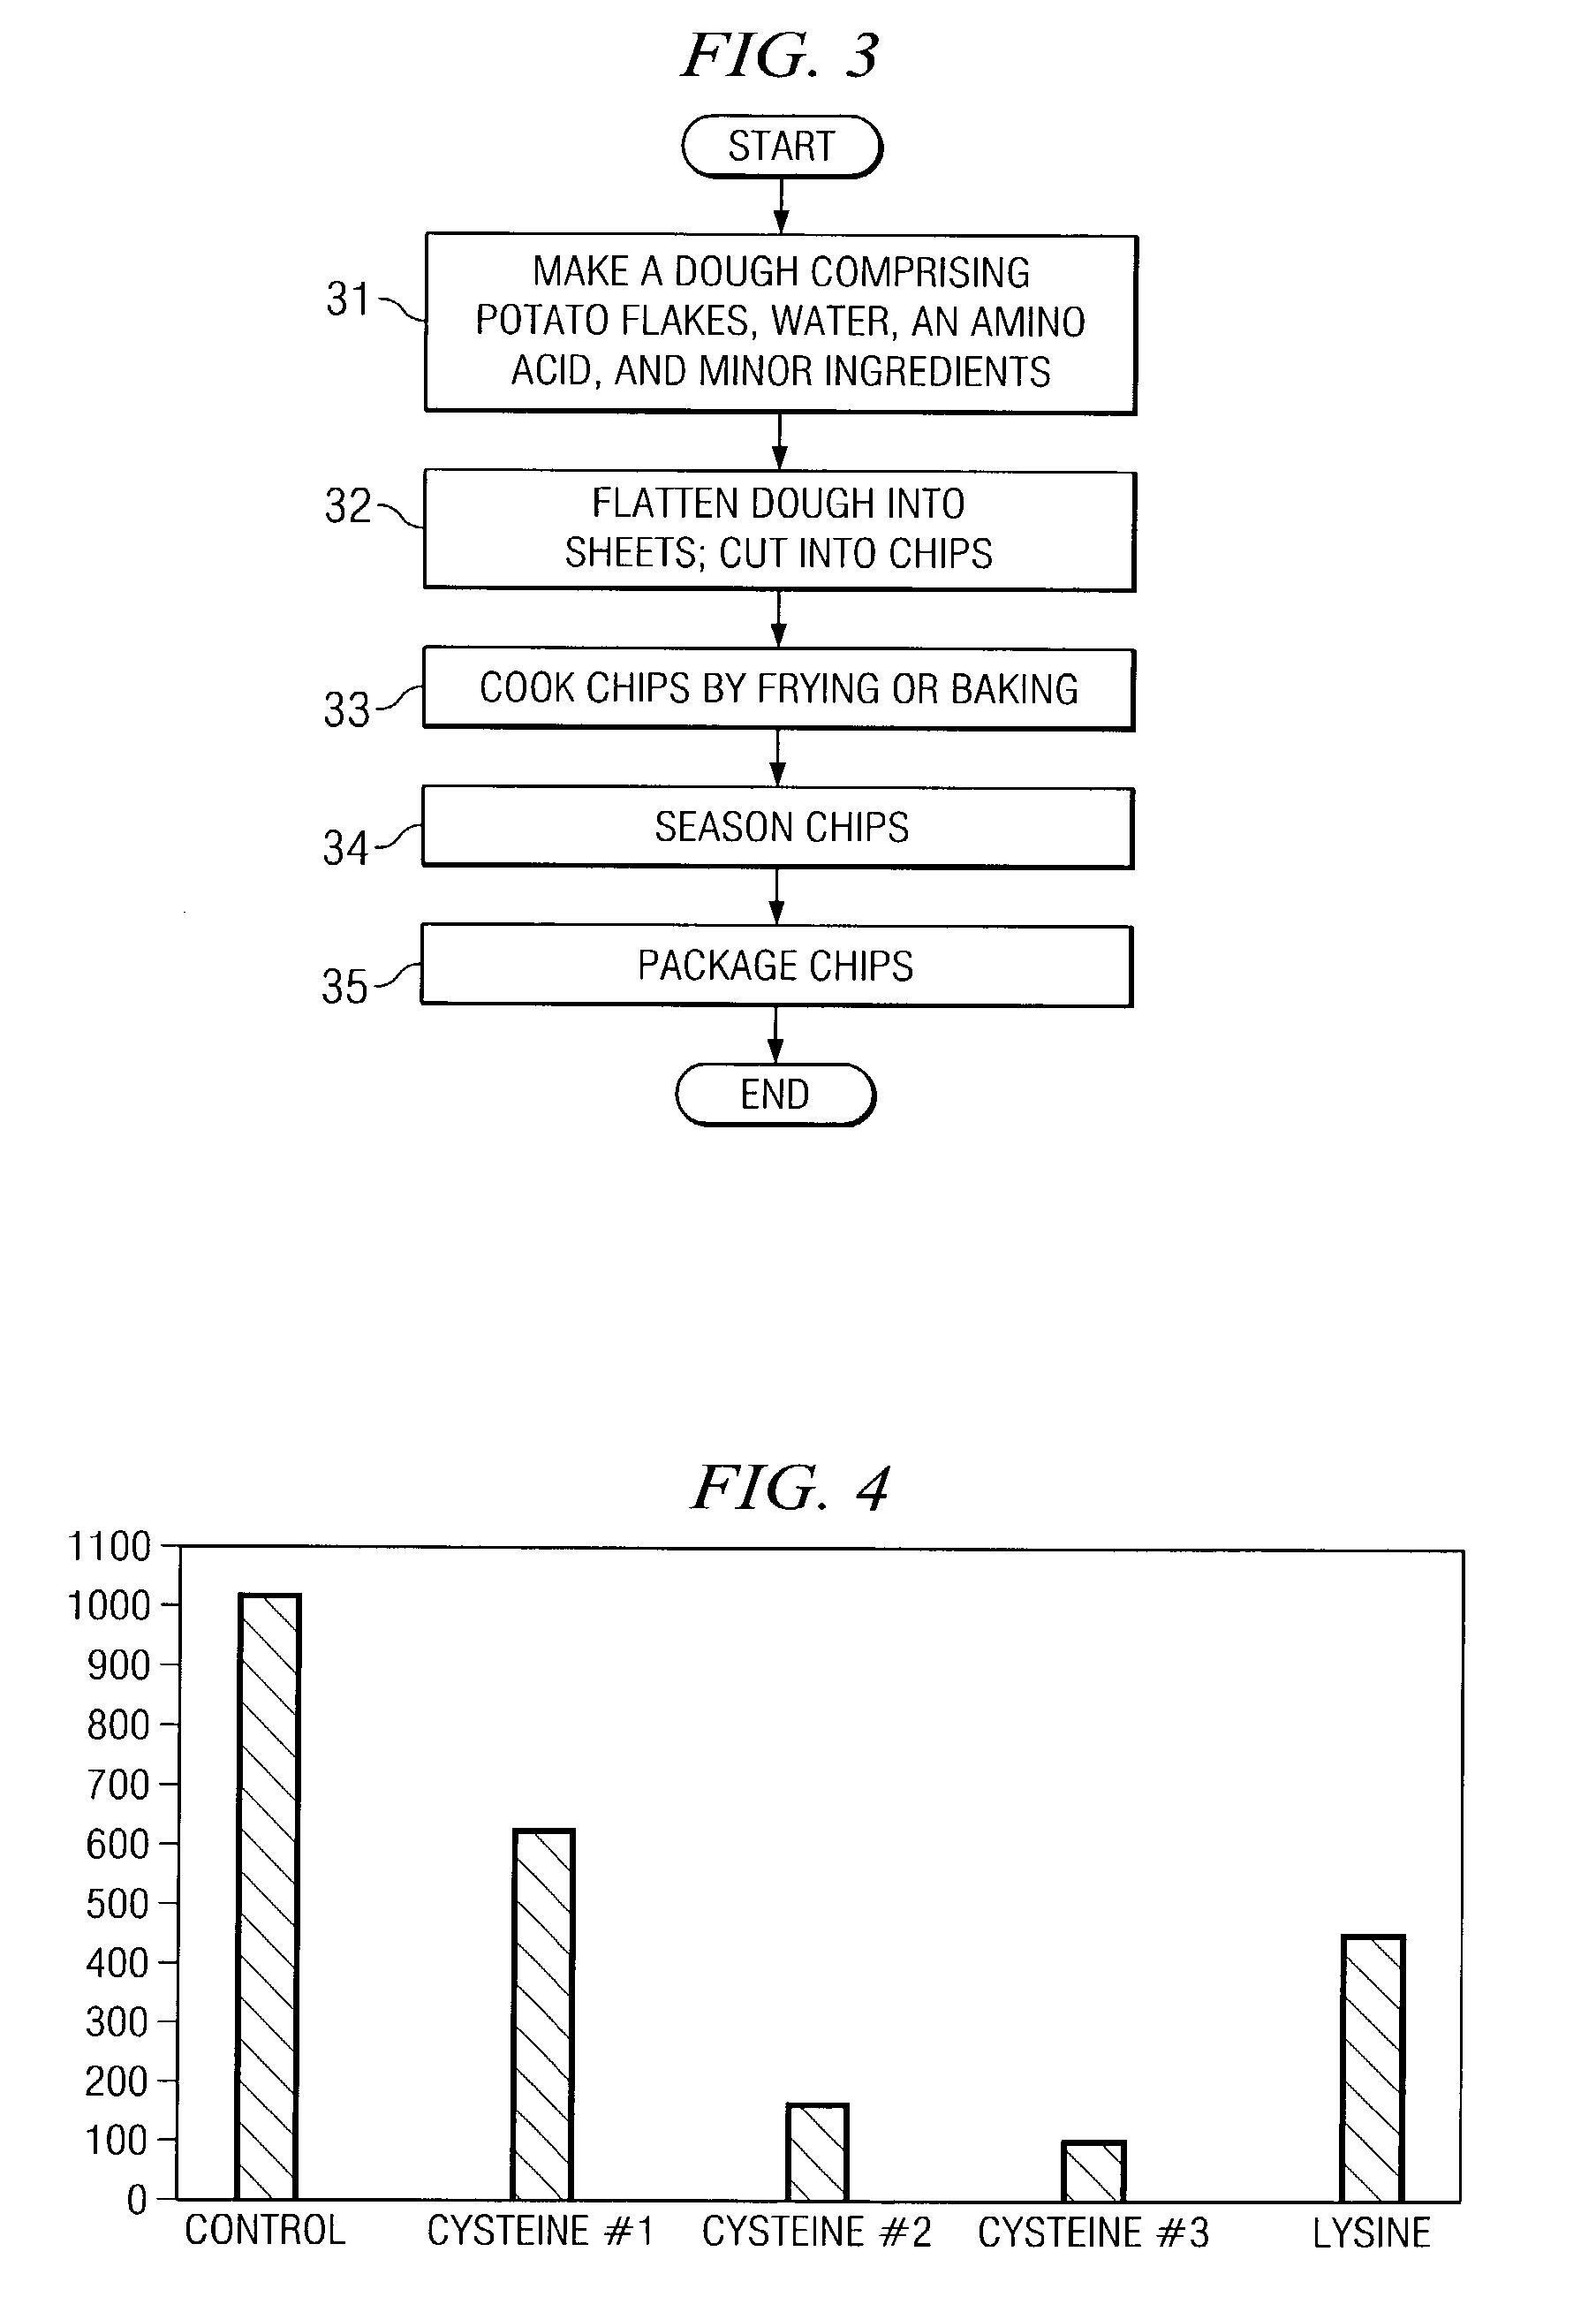 Method for reducing acrylamide formation in thermally processed foods